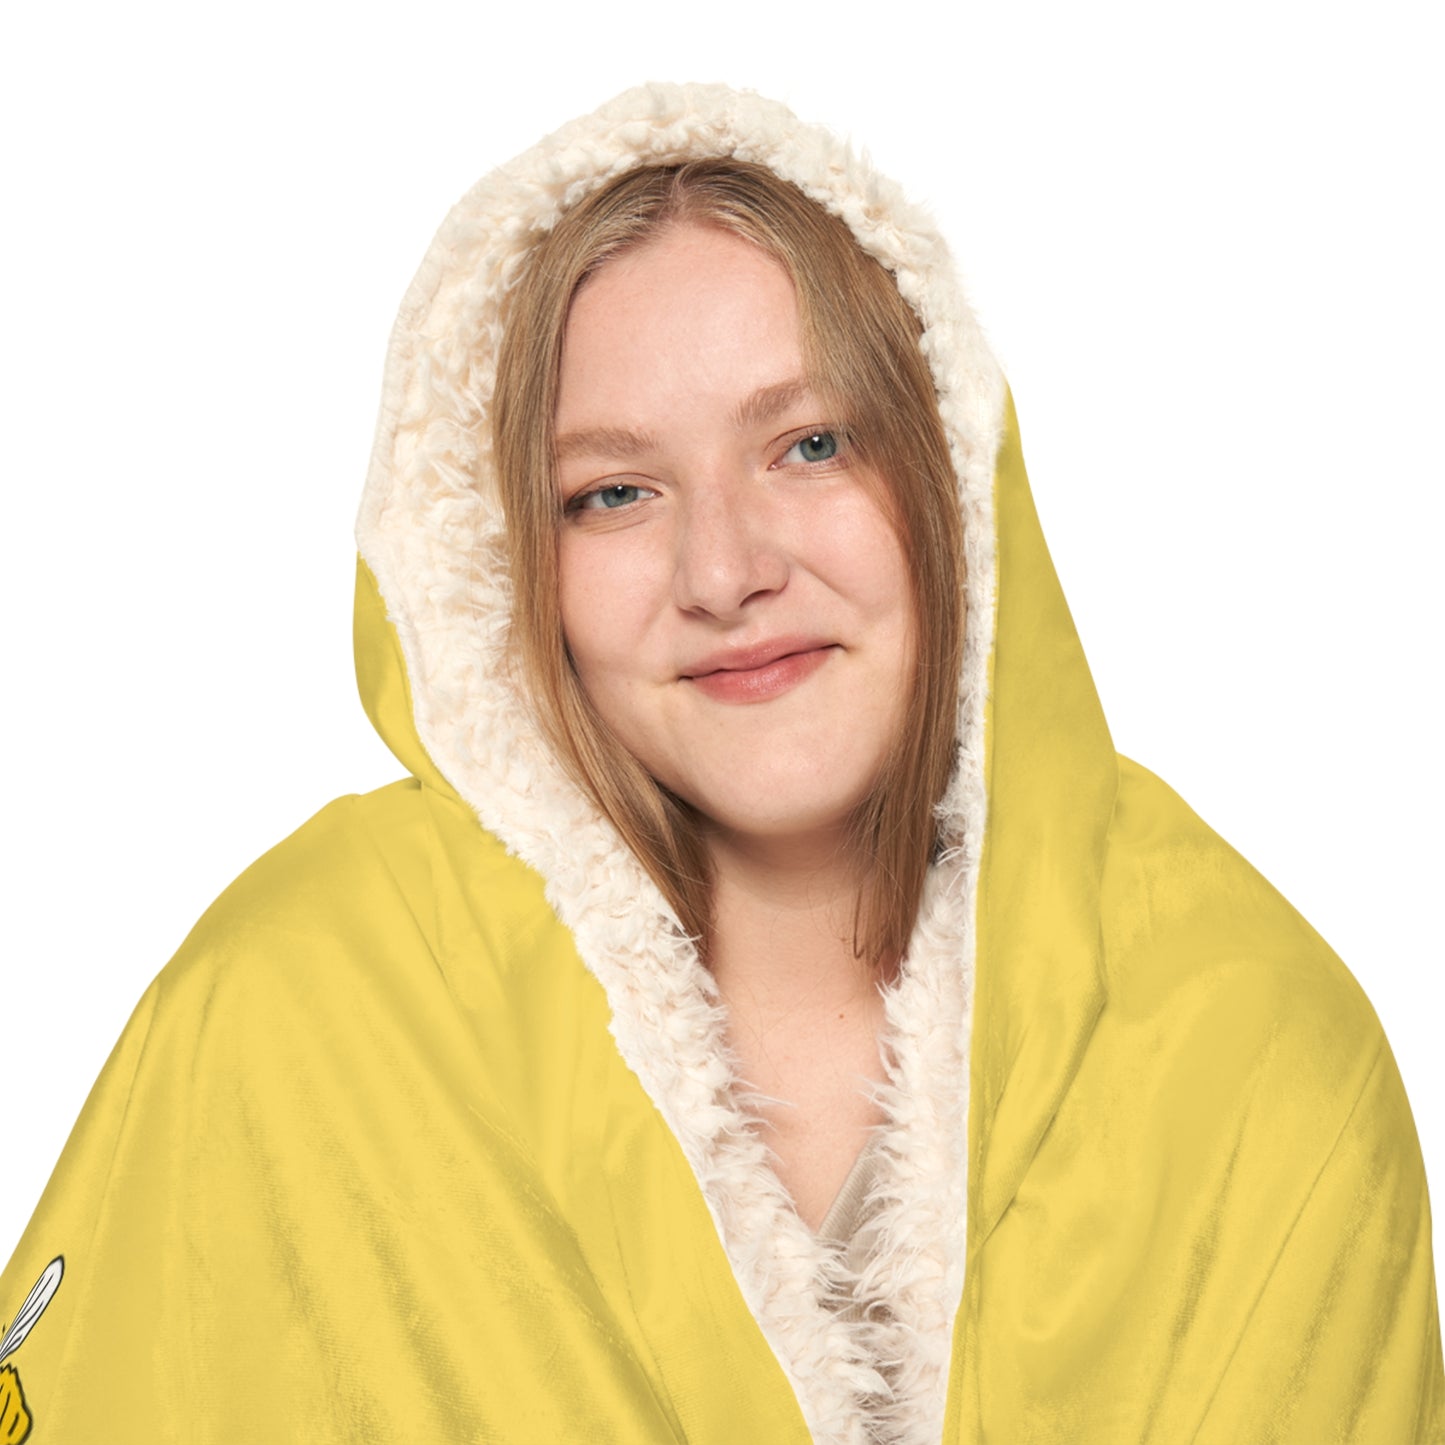 Honeycomb and Bee Hooded Snuggle Blanket